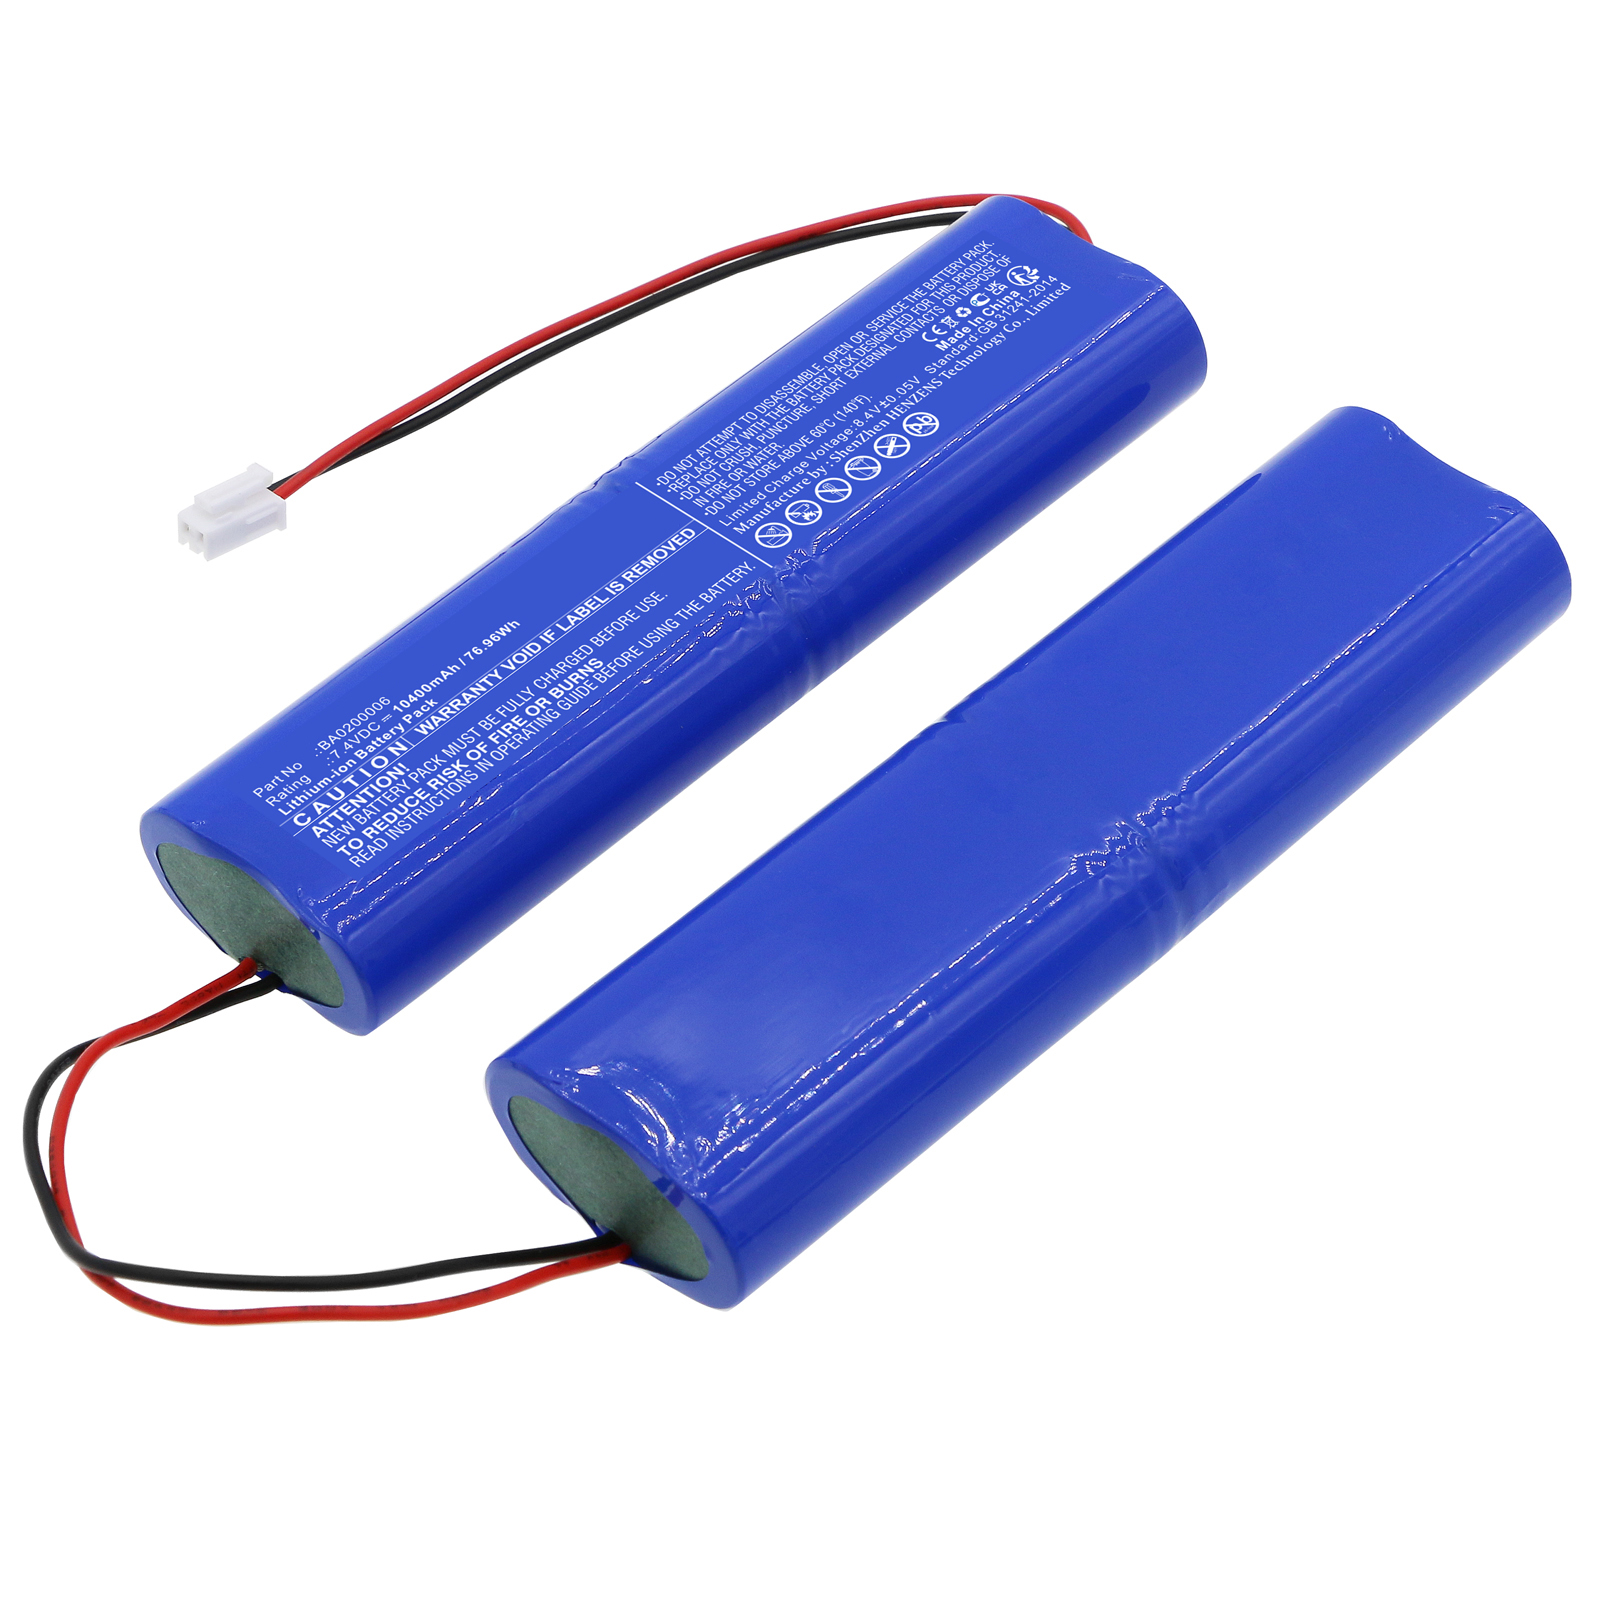 Synergy Digital Equipment Battery, Compatible with Southern BA0200006 Equipment Battery (Li-ion, 7.4V, 10400mAh)